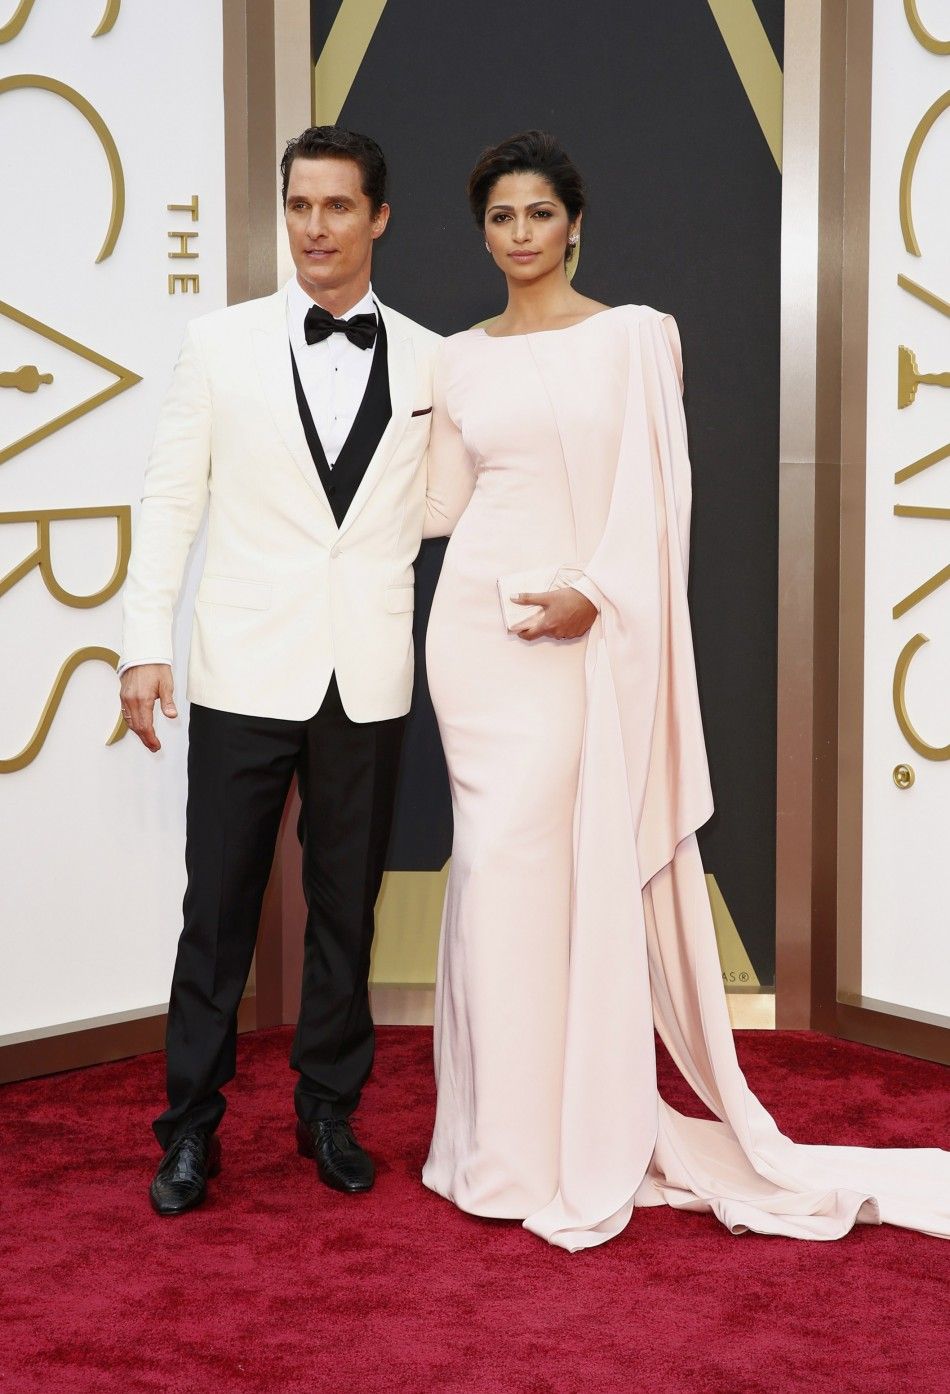 Actor McConaughey and his wife Camila